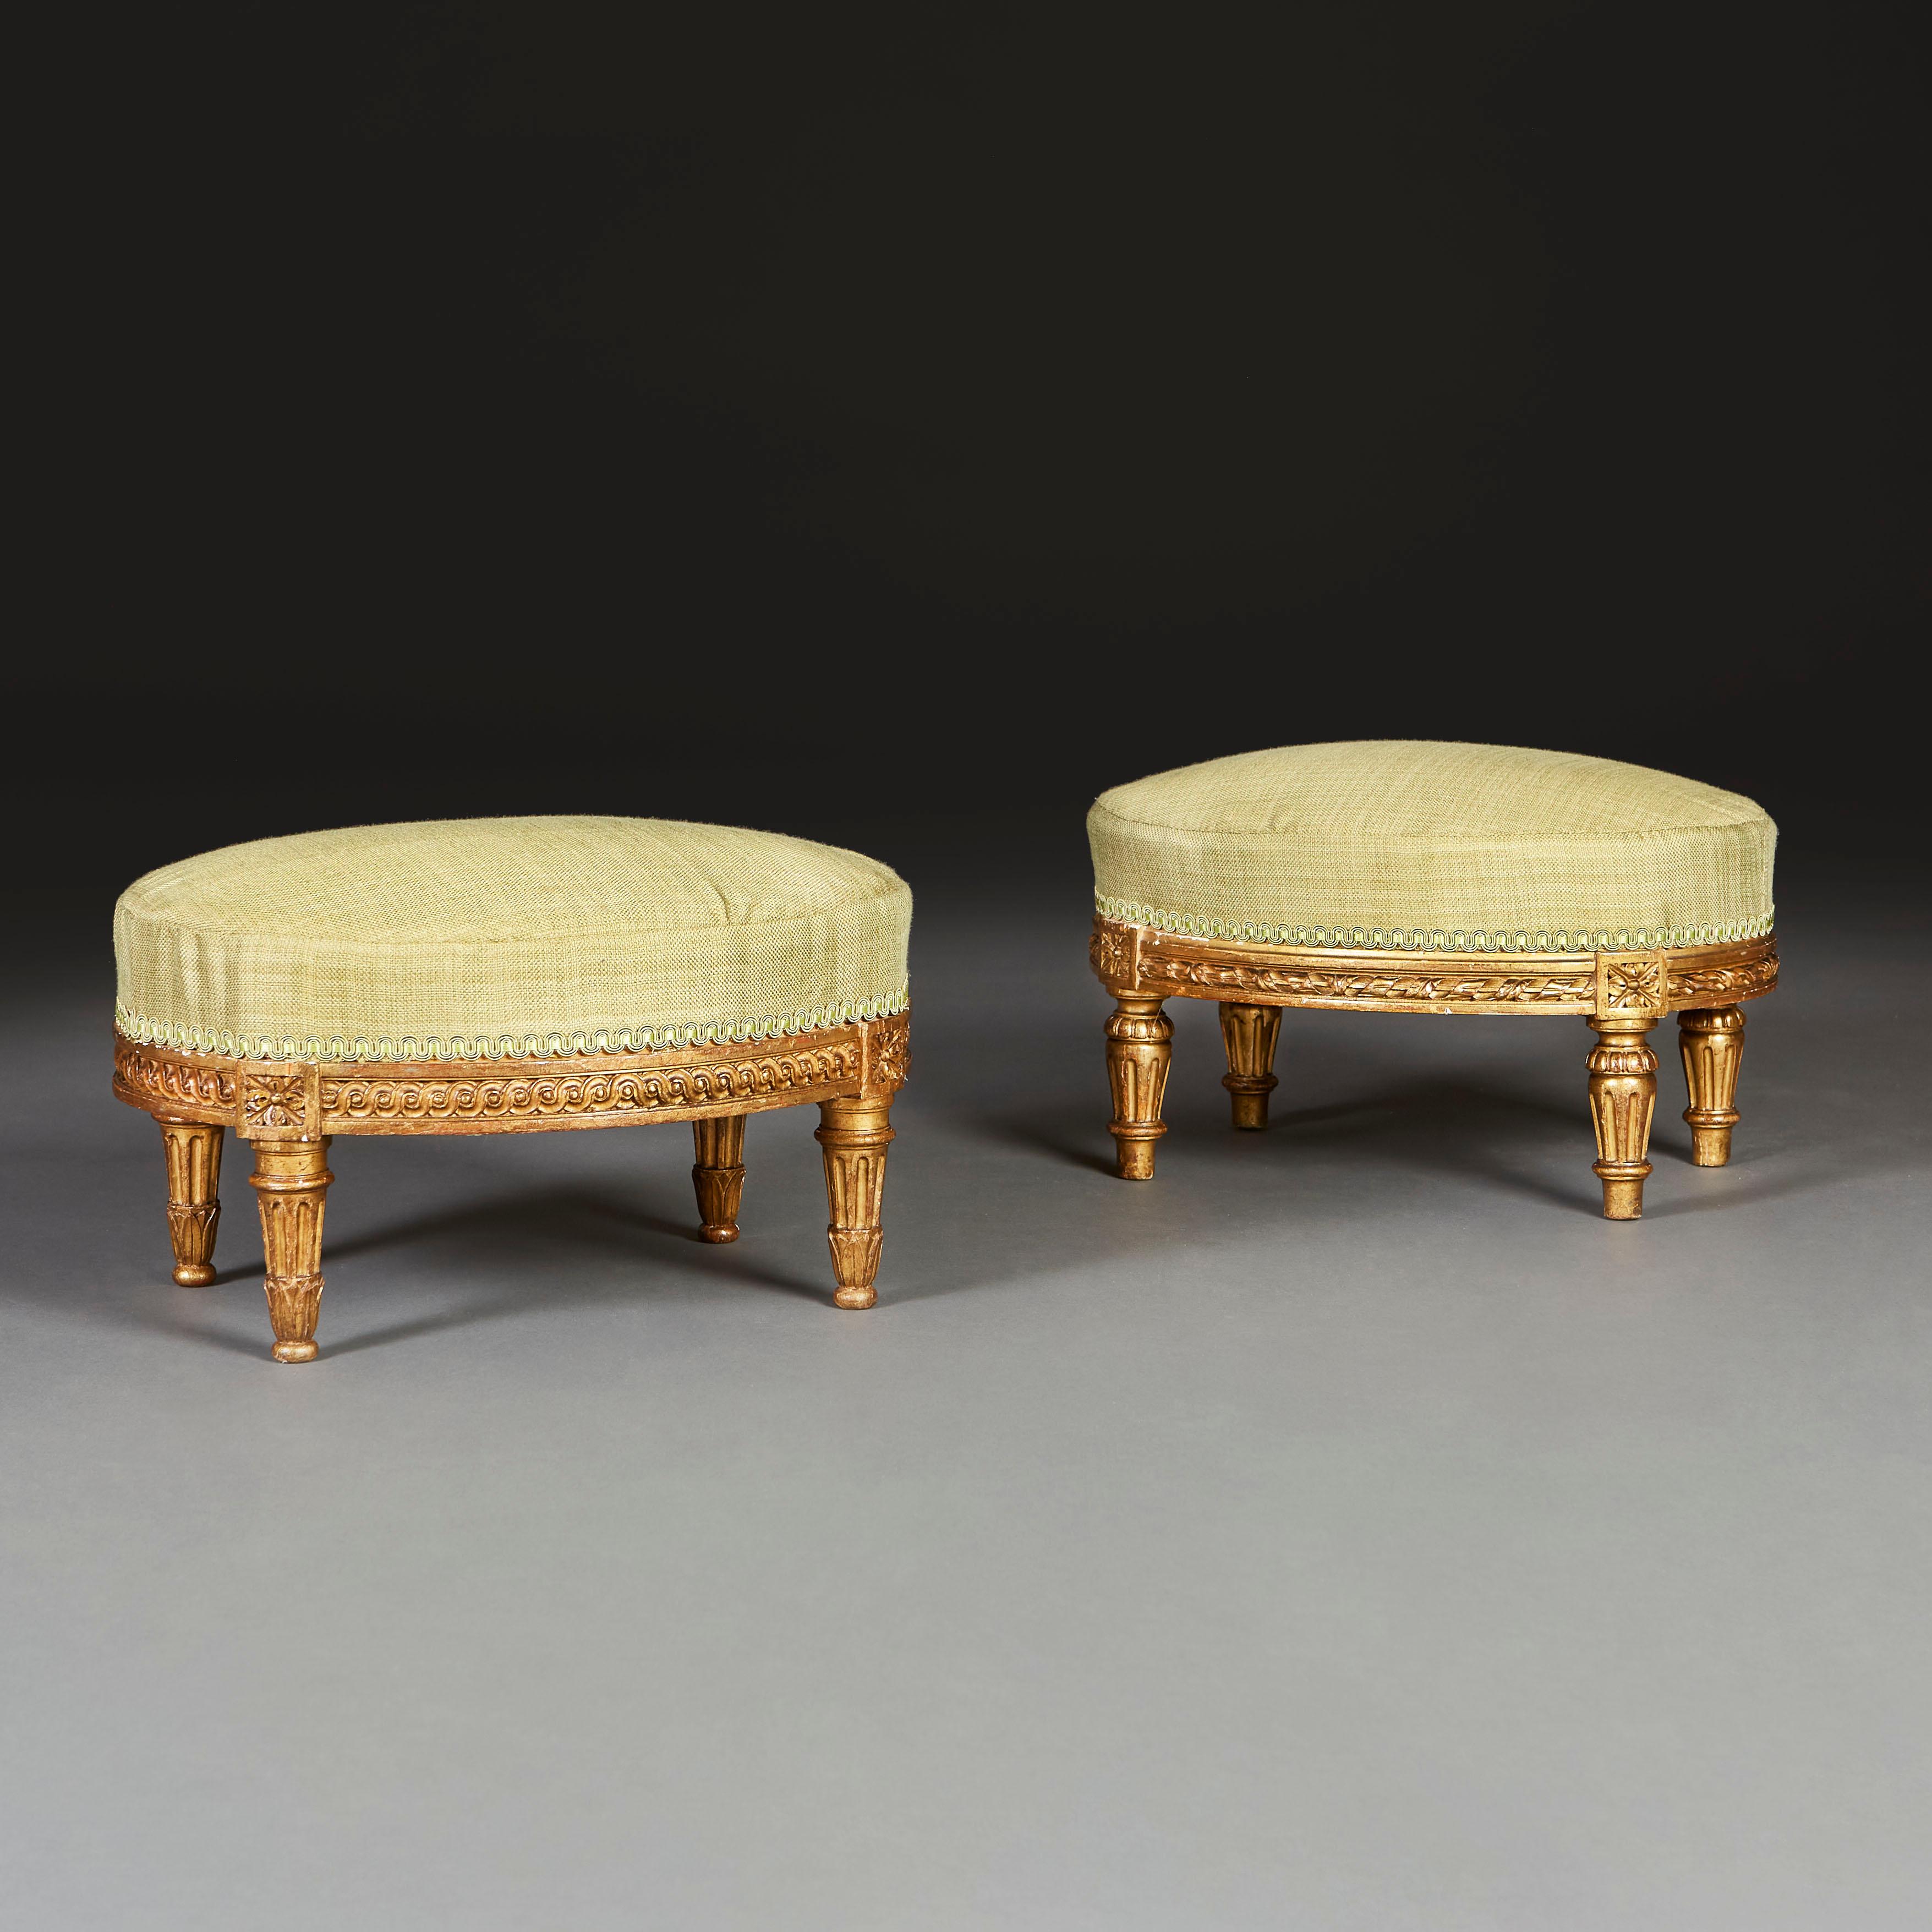 A fine matched pair of eighteenth century giltwood footstools of oval form, with carved guilloche decoration to the seat rail, intersected with paterae above four gadrooned and tapering legs. Now upholstered in green silk. With inventory marks from